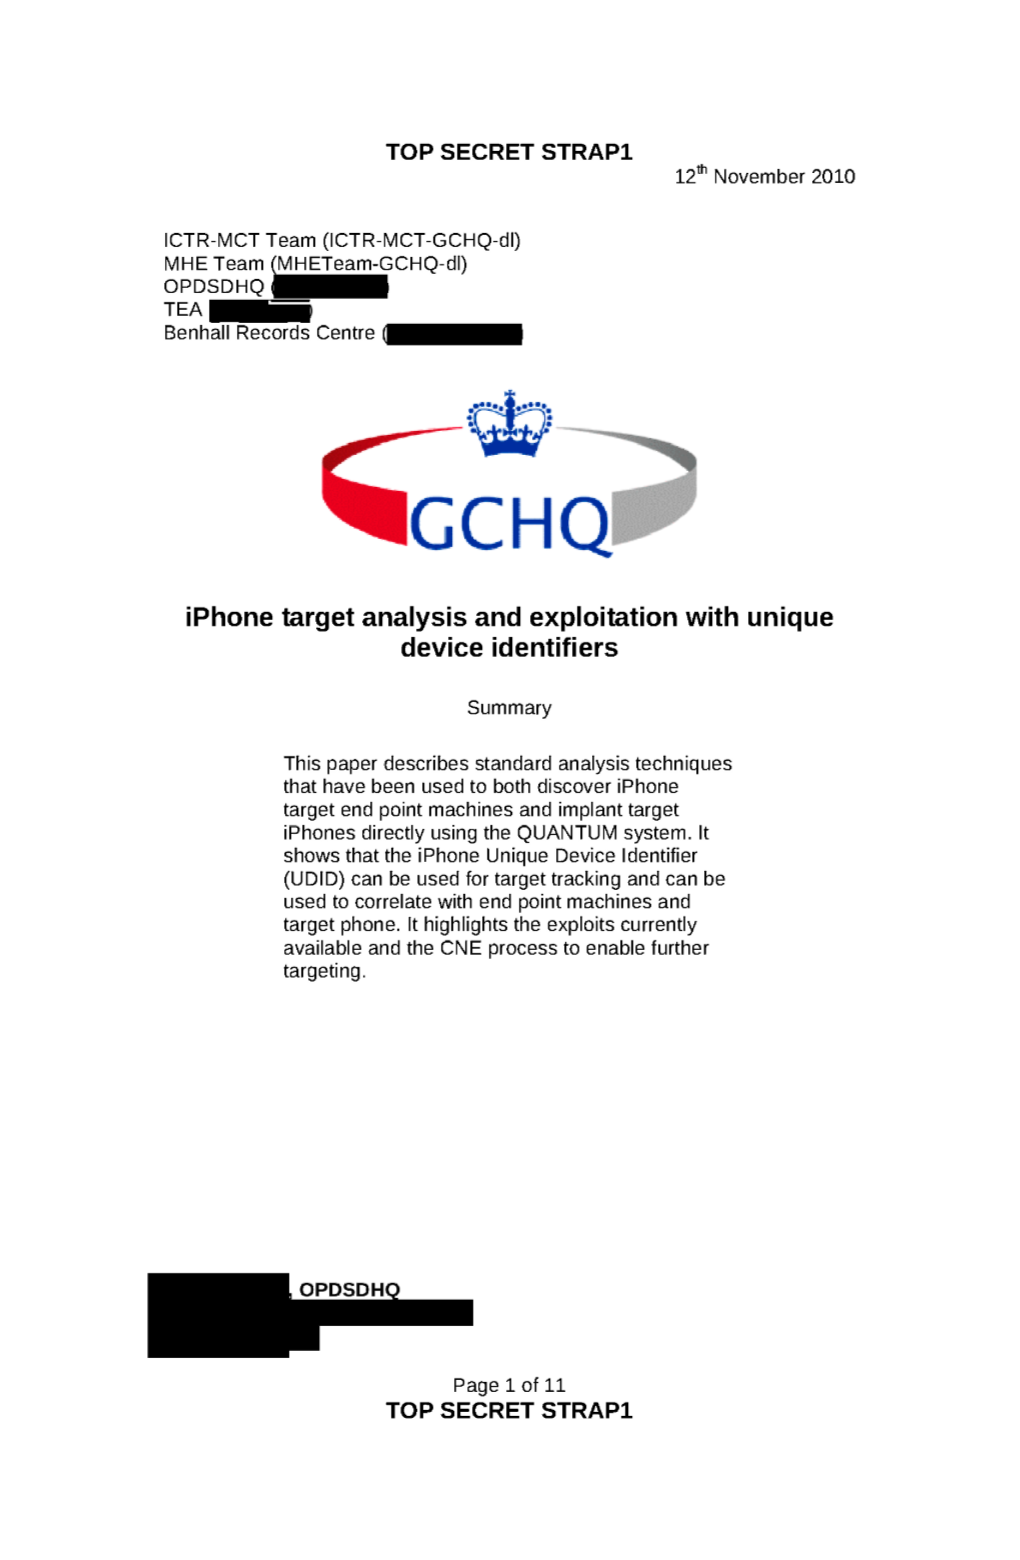 Iphone Target Analysis and Exploitation with Unique Device Identifiers